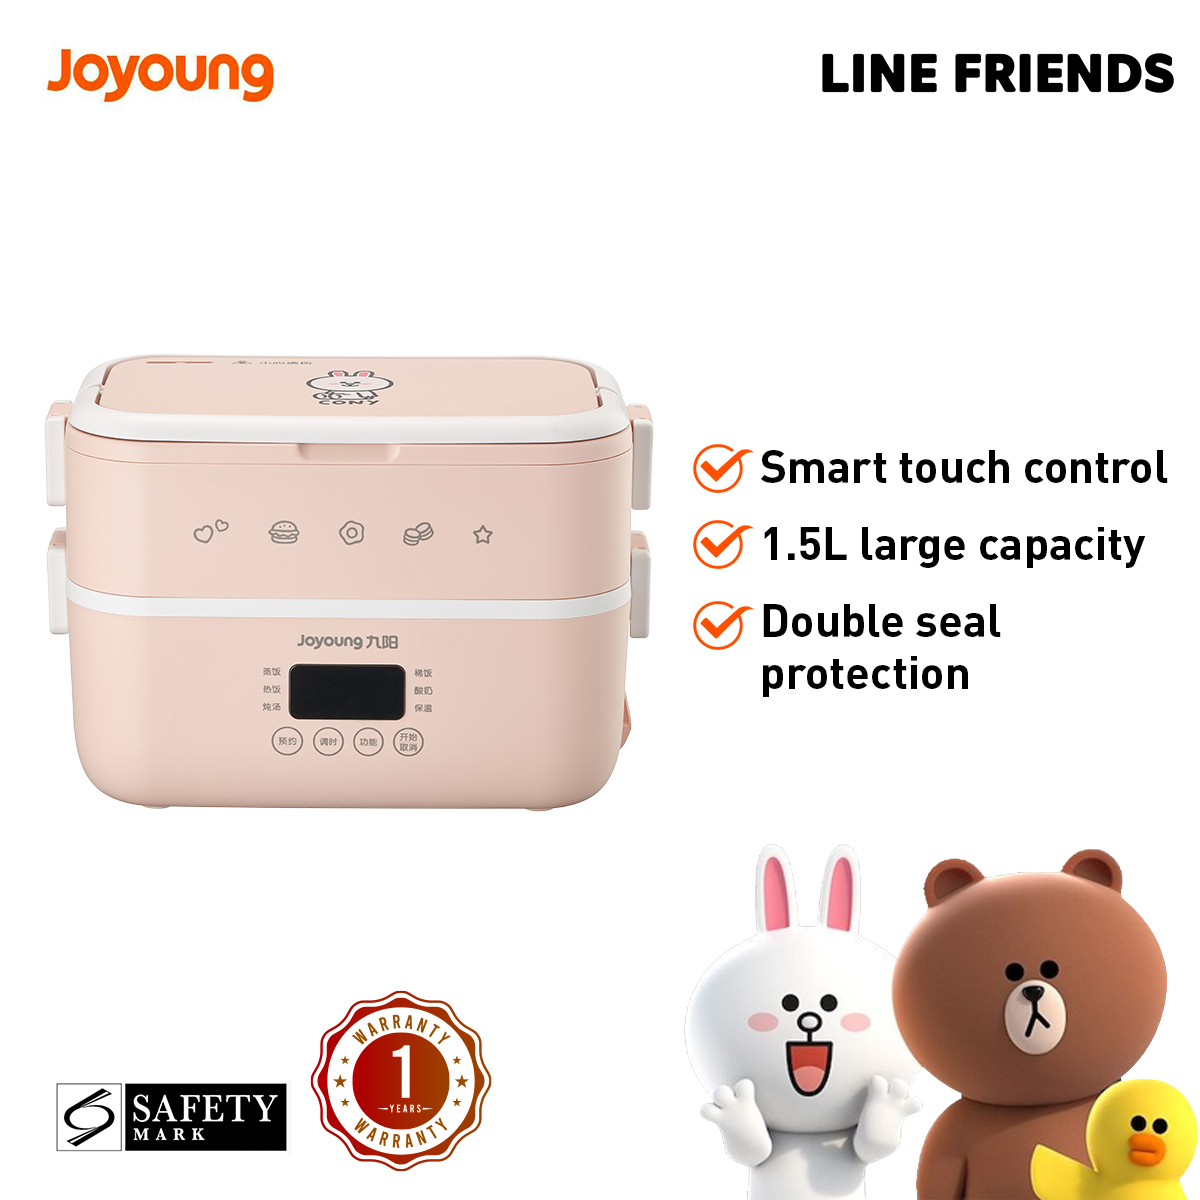 Joyoung Line Friends Coni Electric Heating Lunch Box / Smart Reservation Timing Cooking